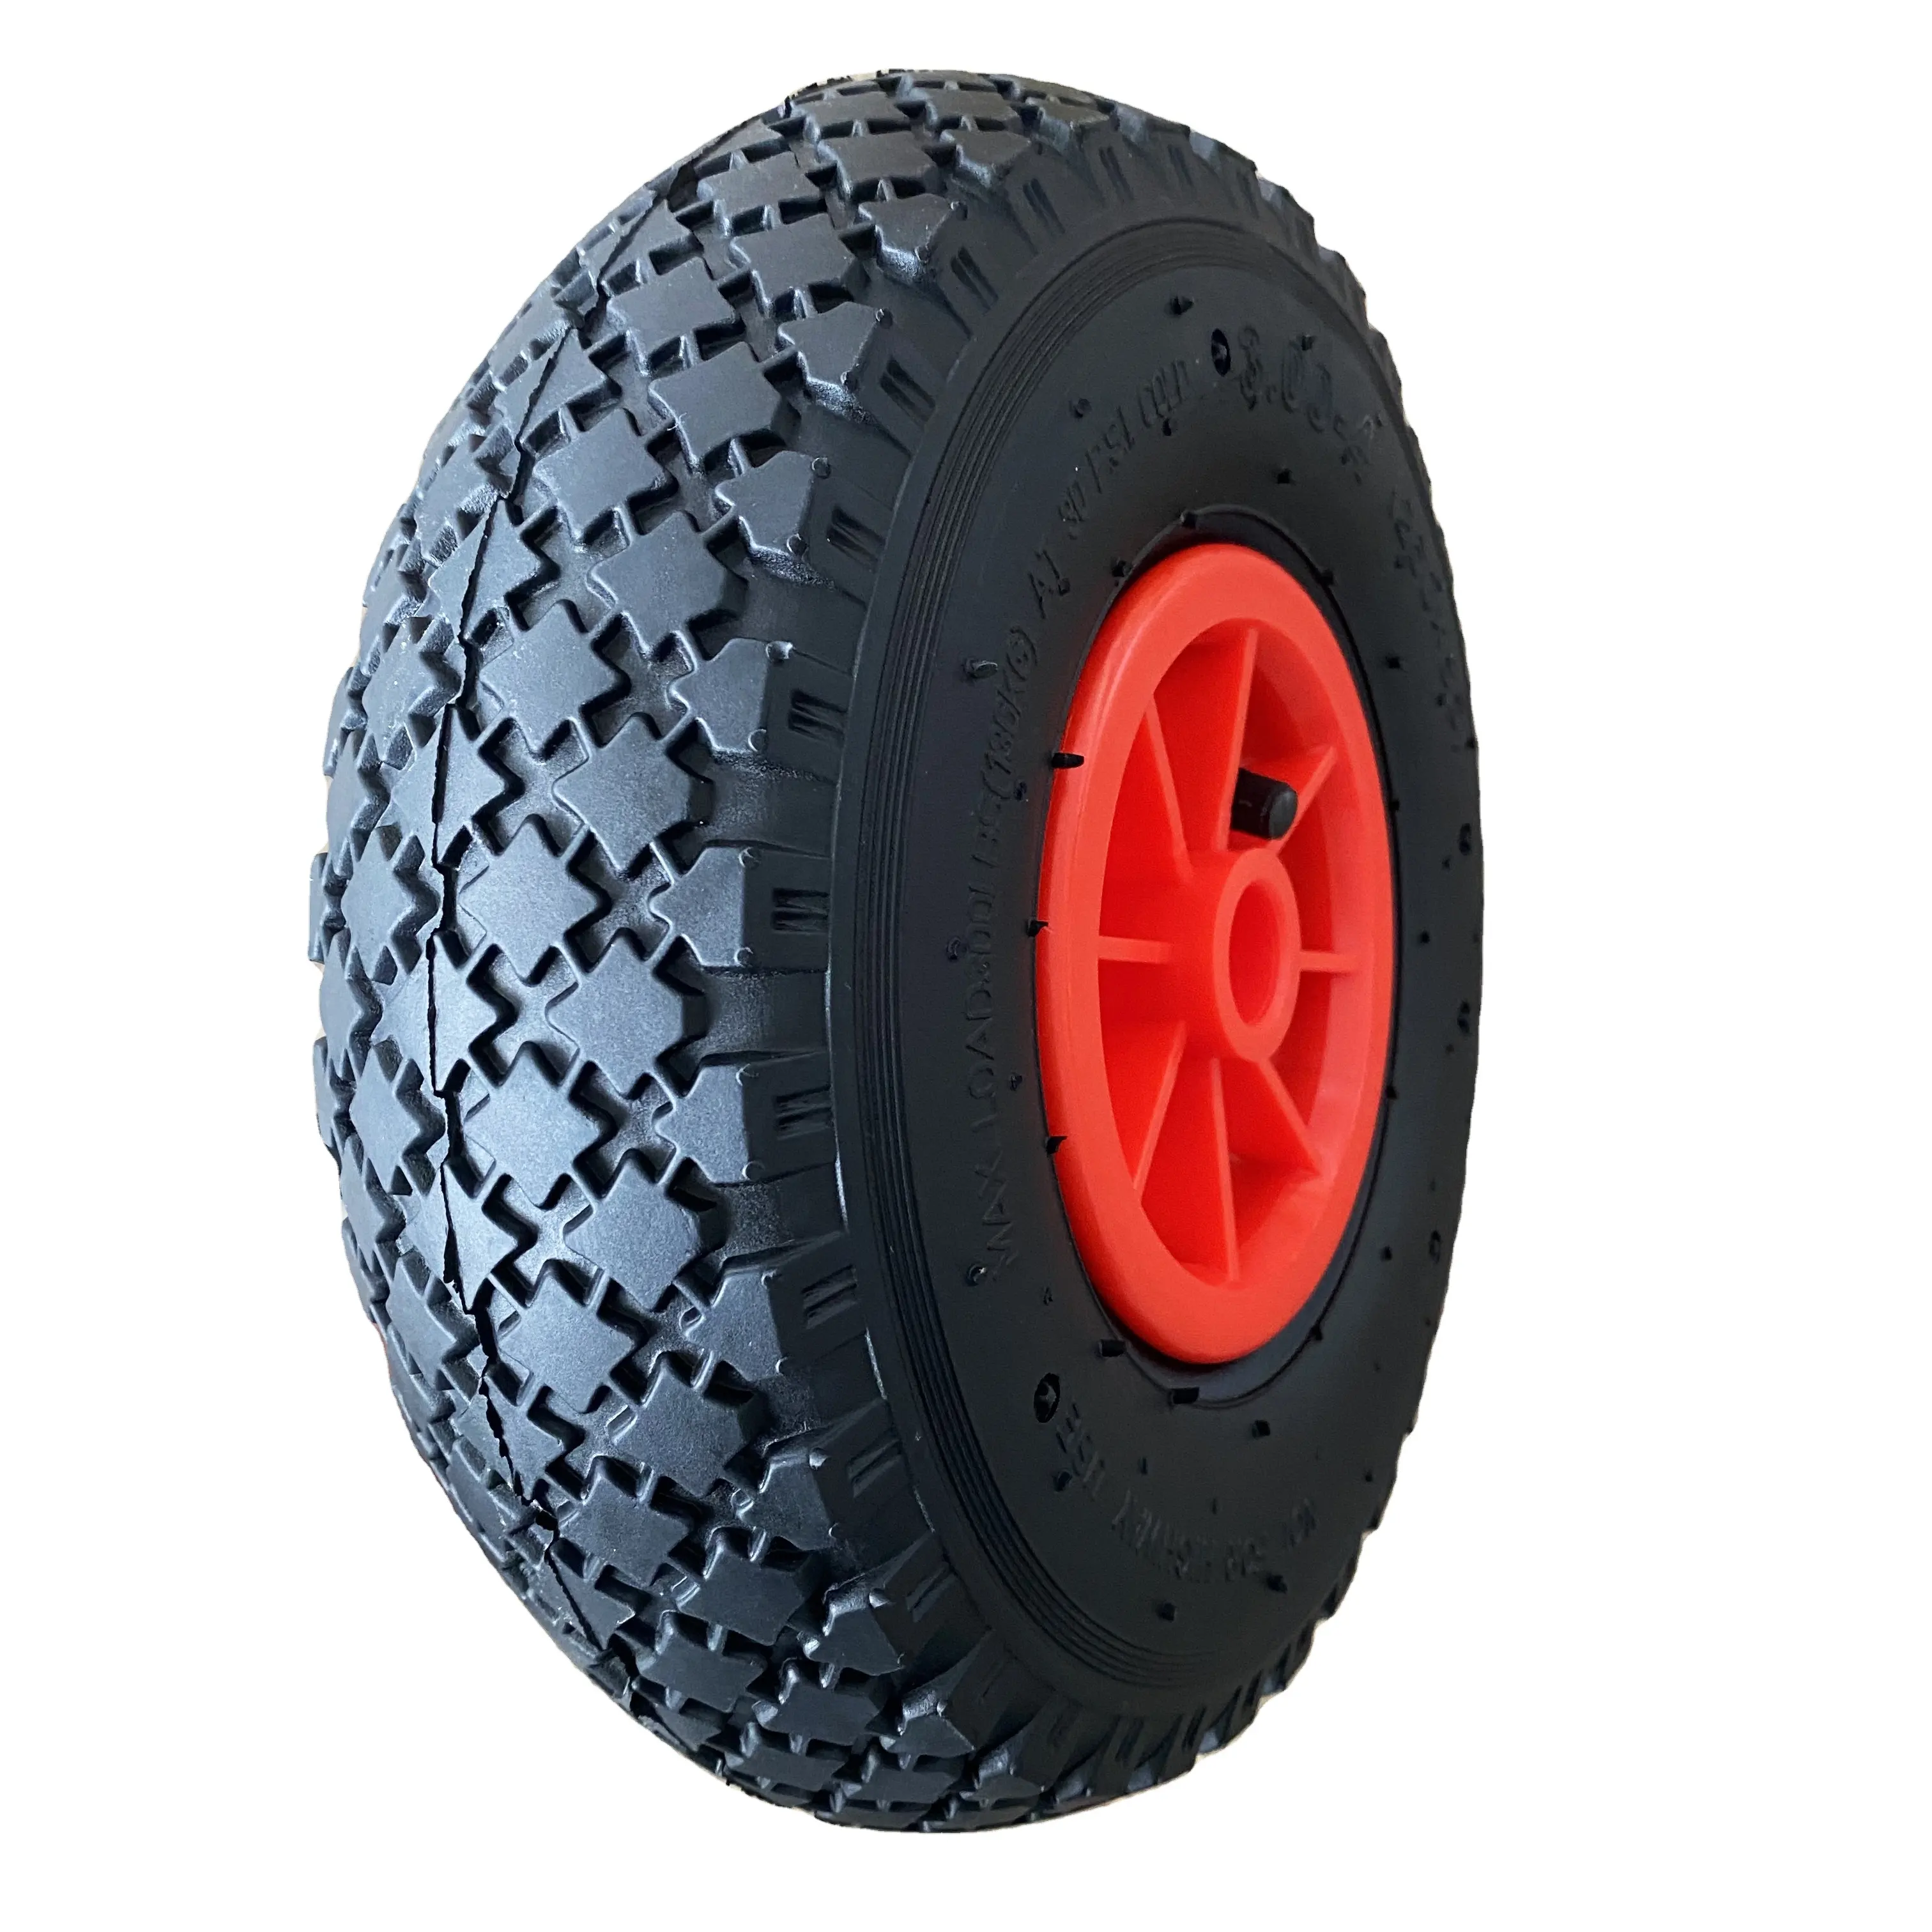 260x85 3.00-4 Pneumatic Air Rubber Wheel Inflatable Tire for Hand Truck